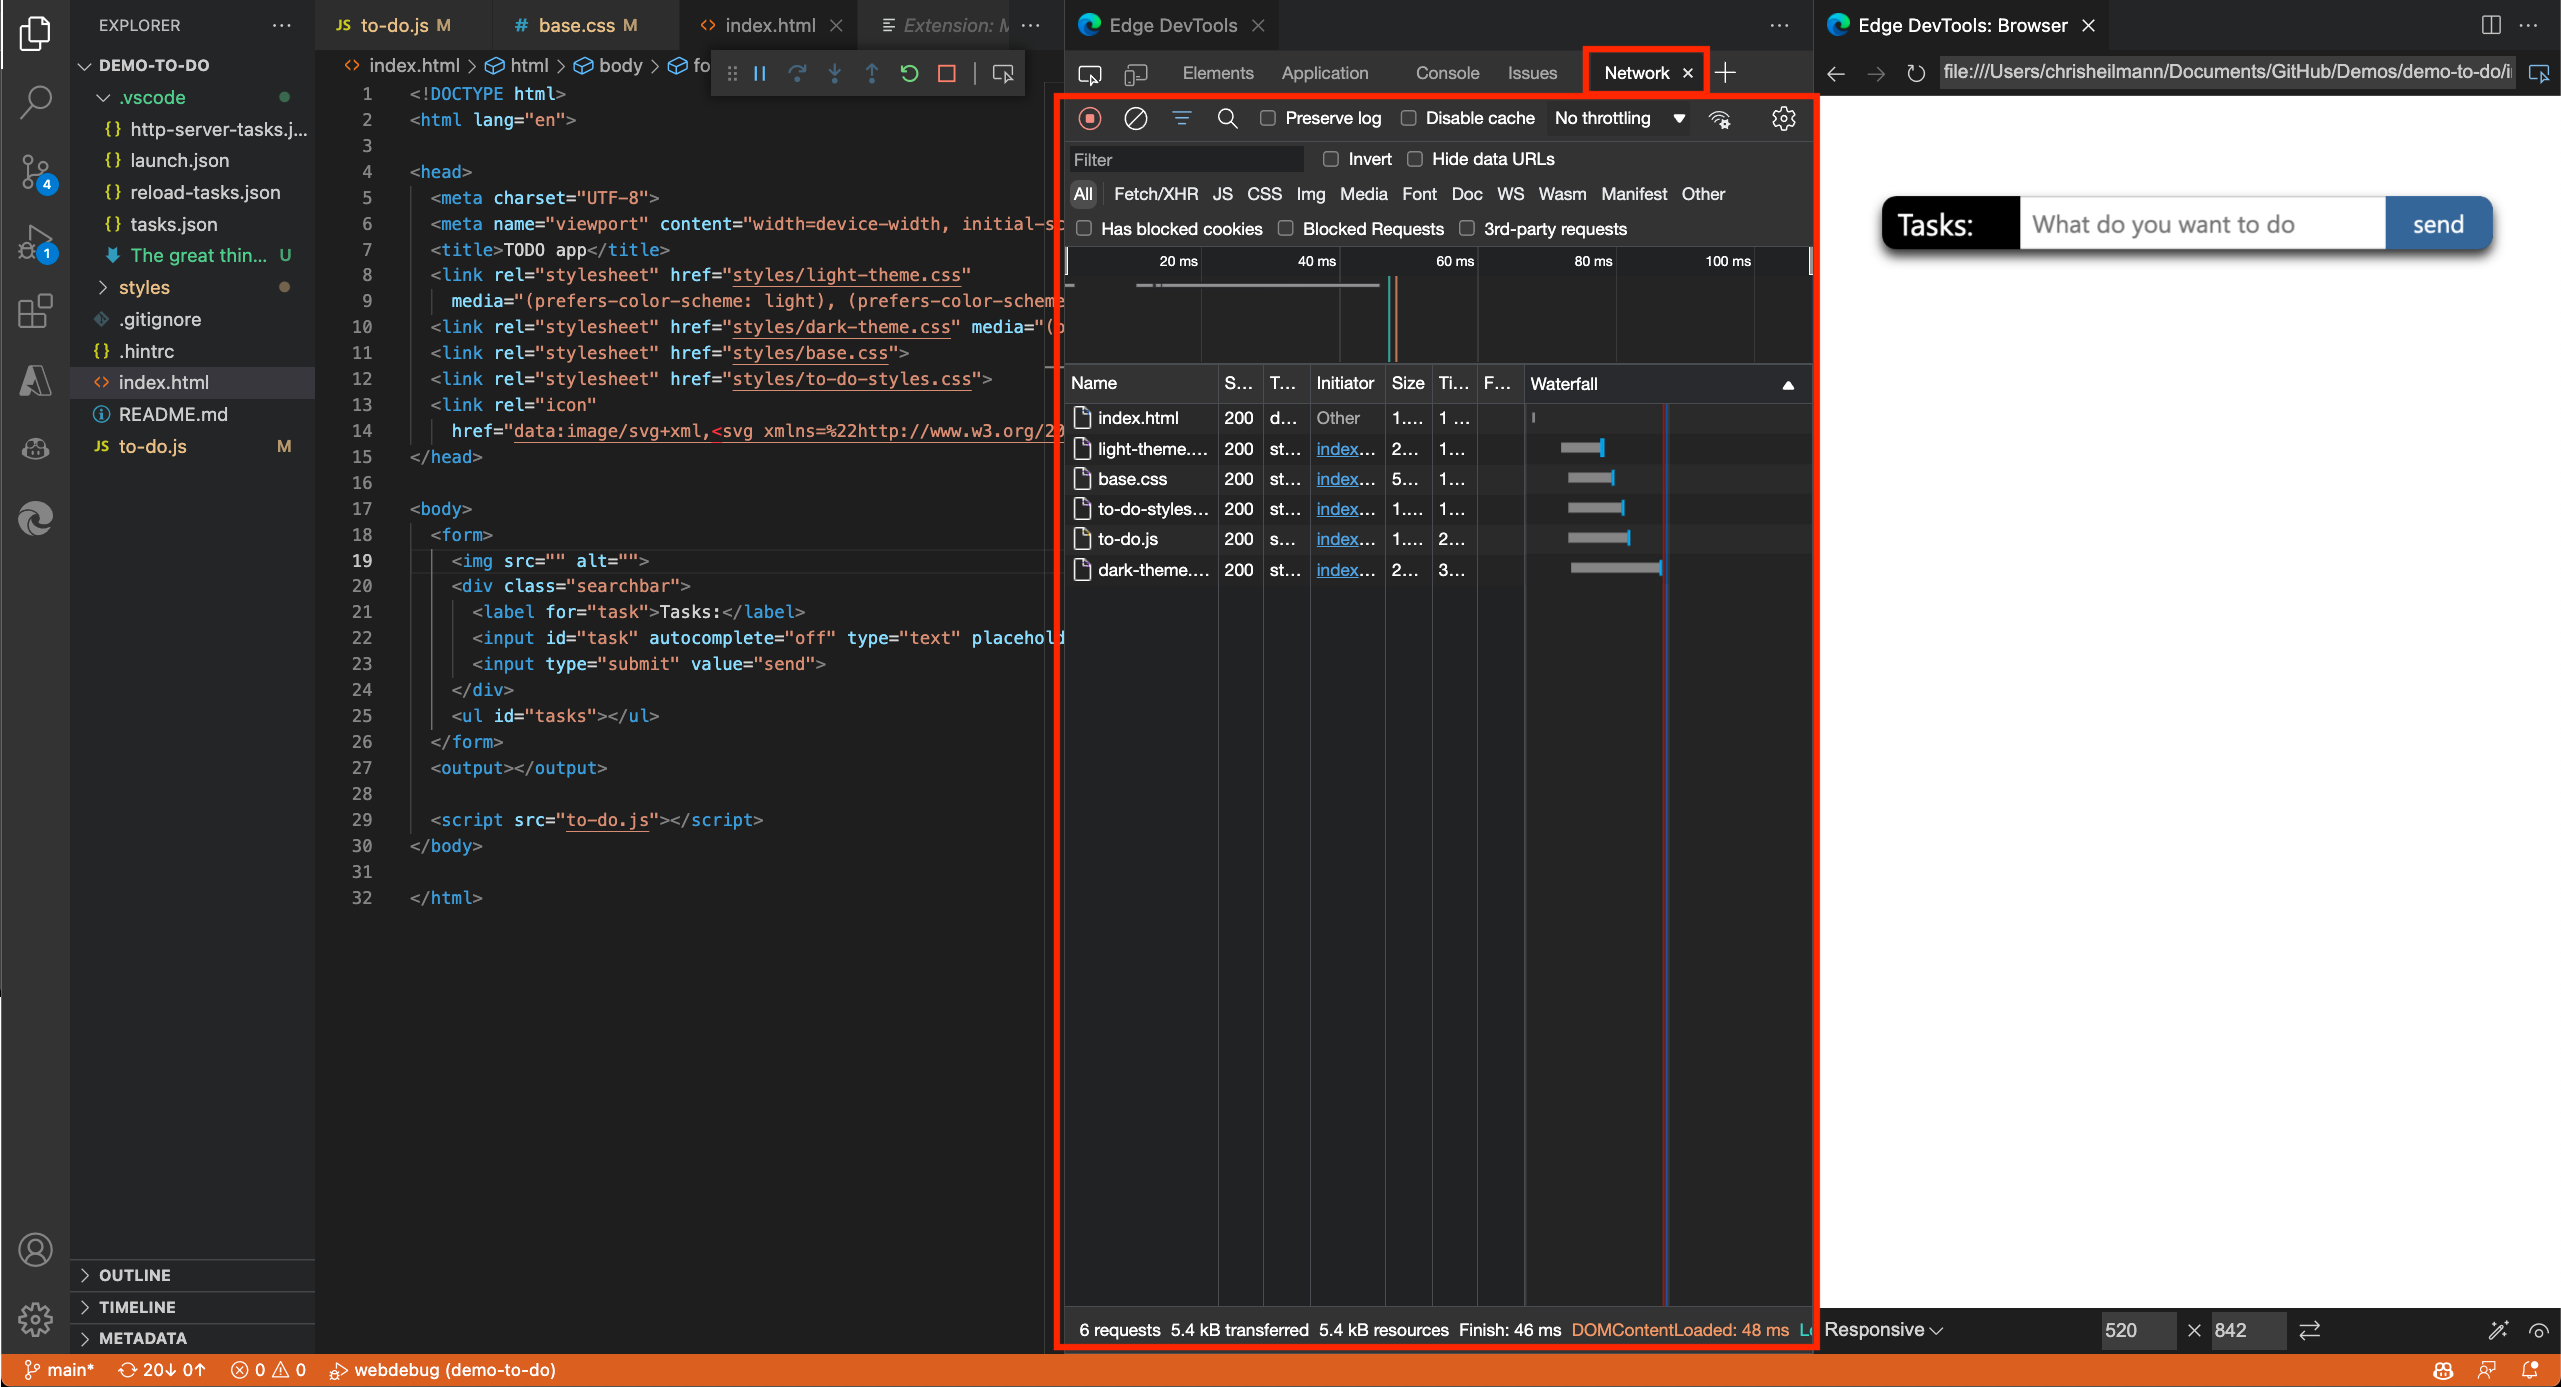 The Network tool inside the Edge DevTools for Visual Studio Code extension